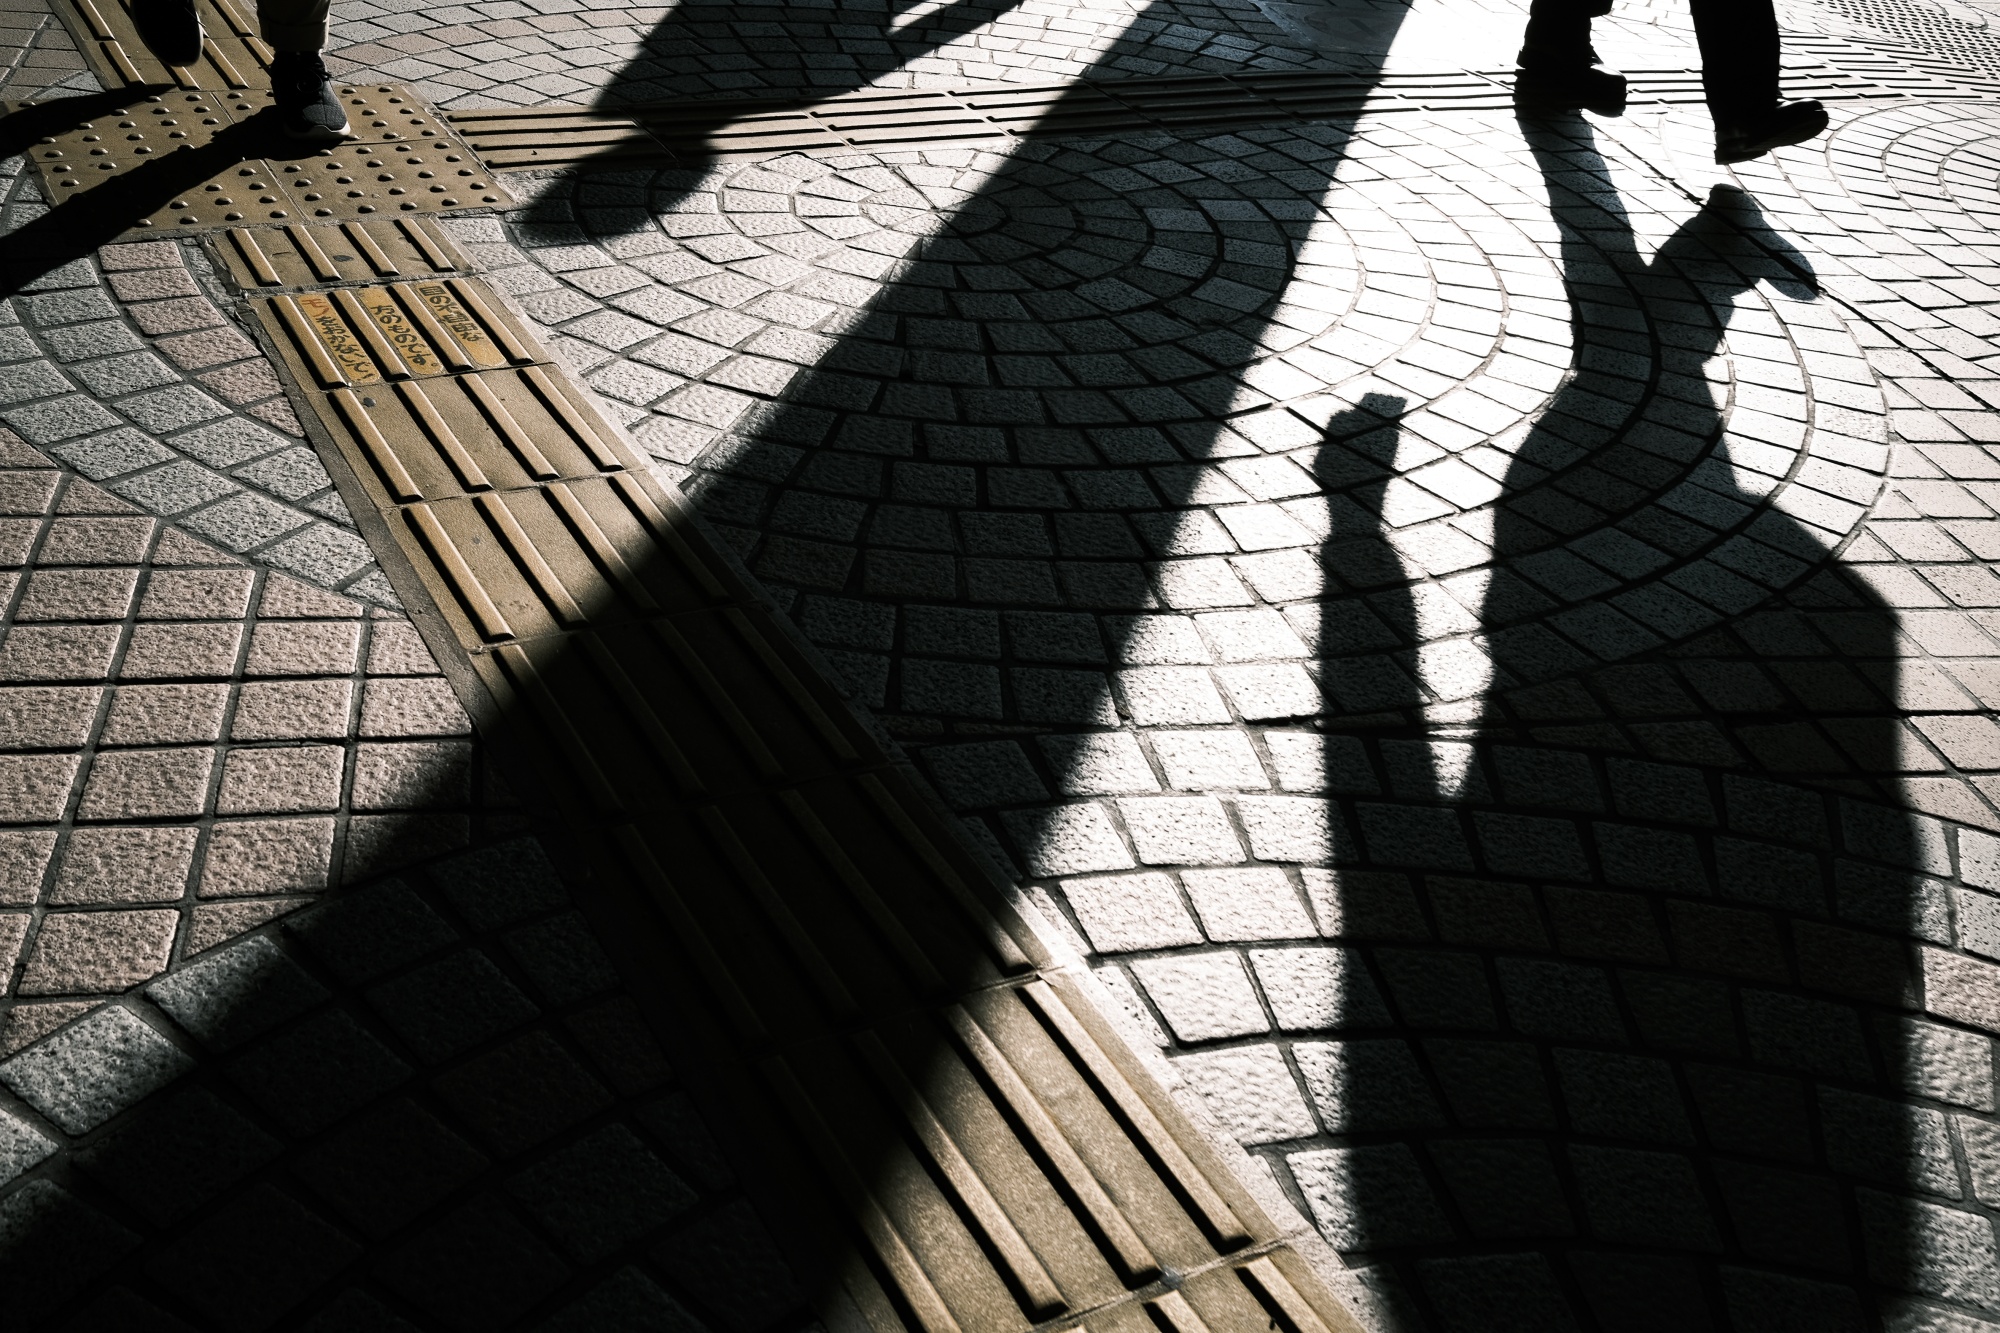 The shadows of commuters are cast on the ground in Tokyo.